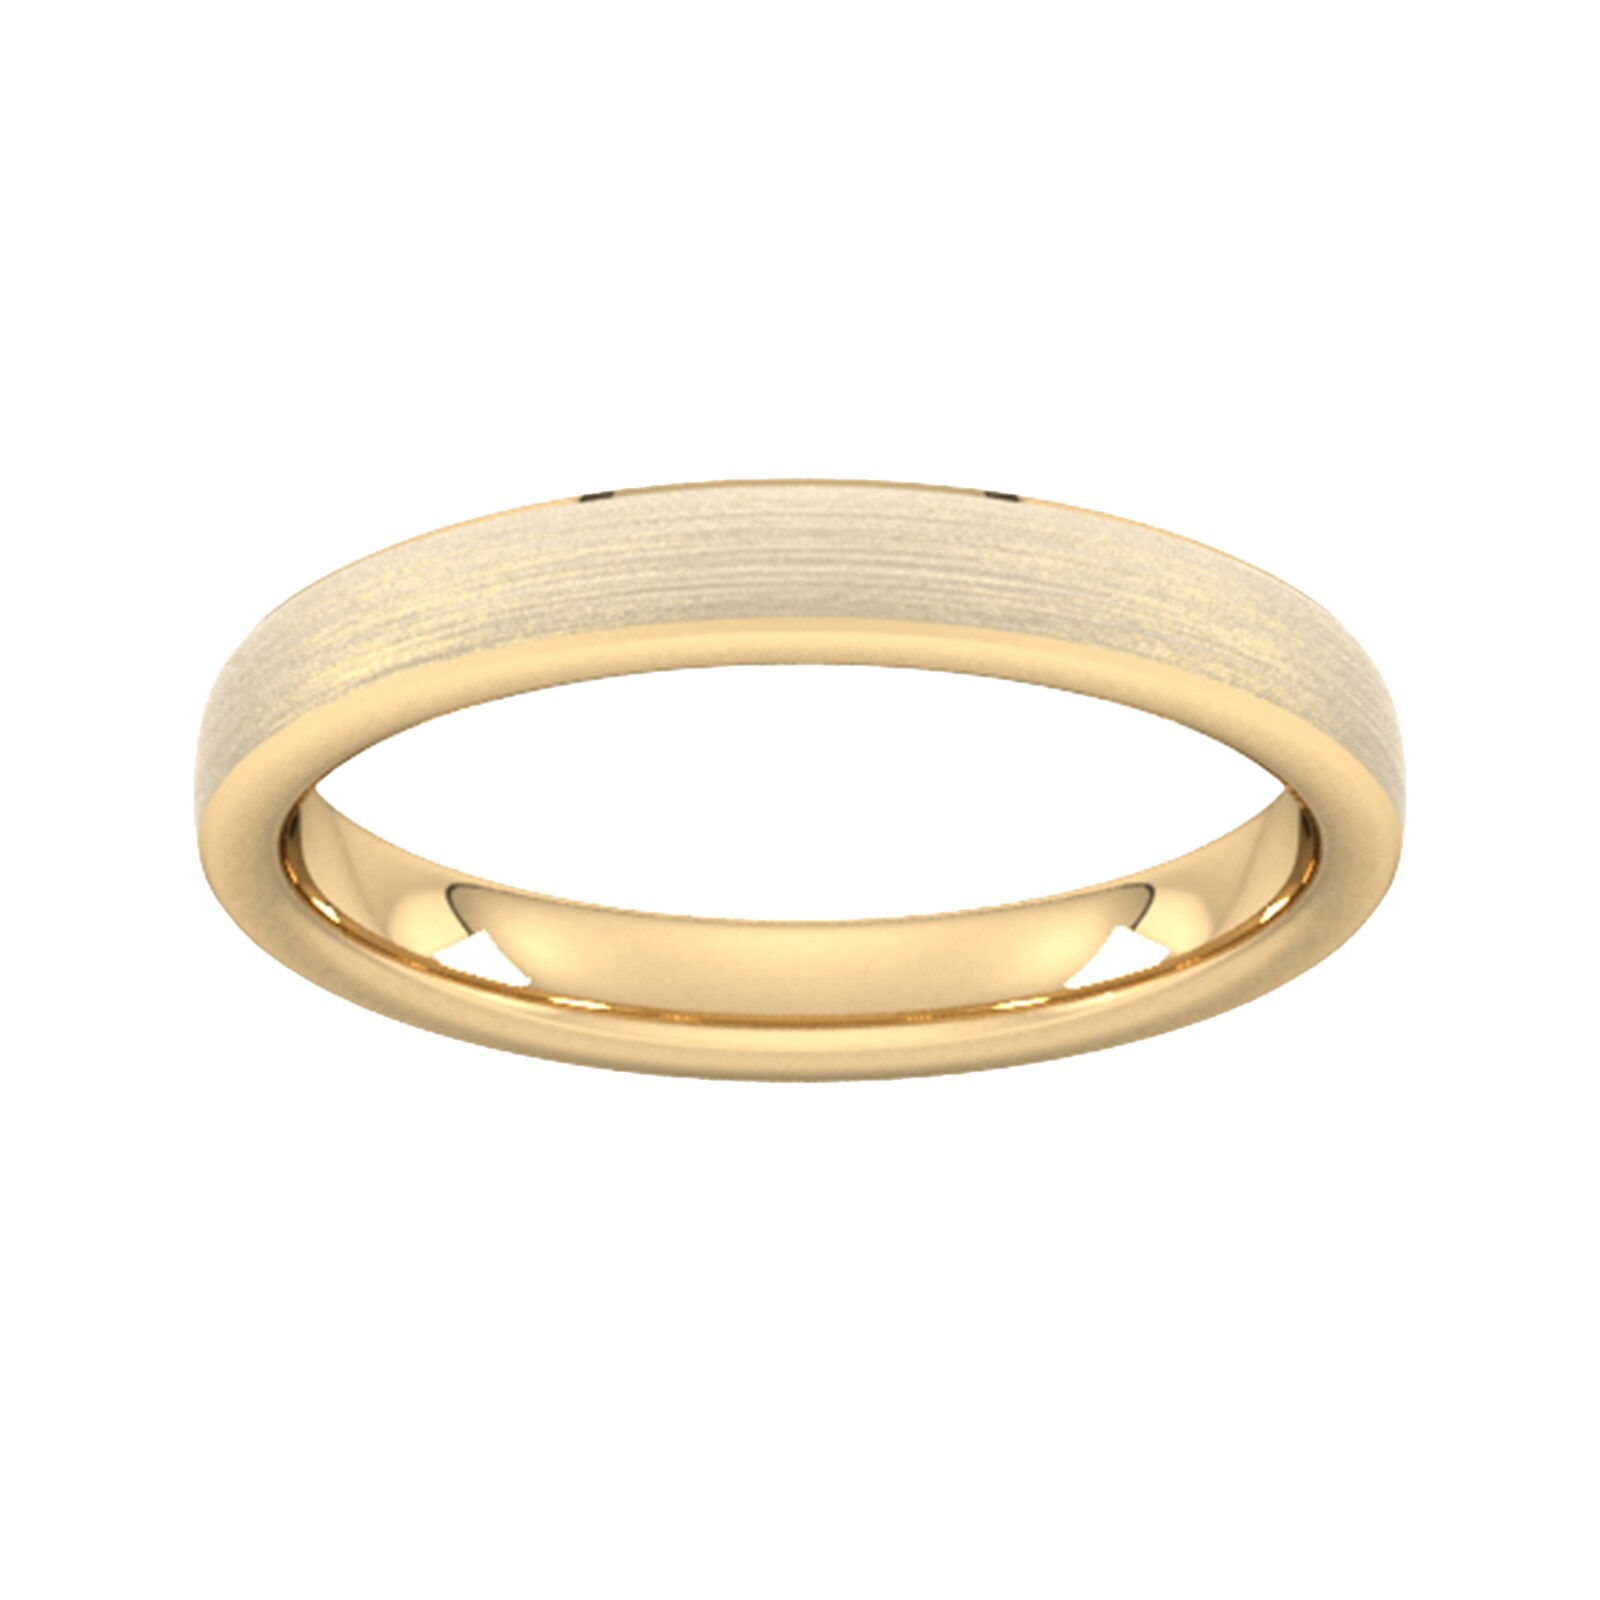 3mm Traditional Court Heavy Polished Chamfered Edges With Matt Centre Wedding Ring In 9 Carat Yellow Gold - Ring Size L